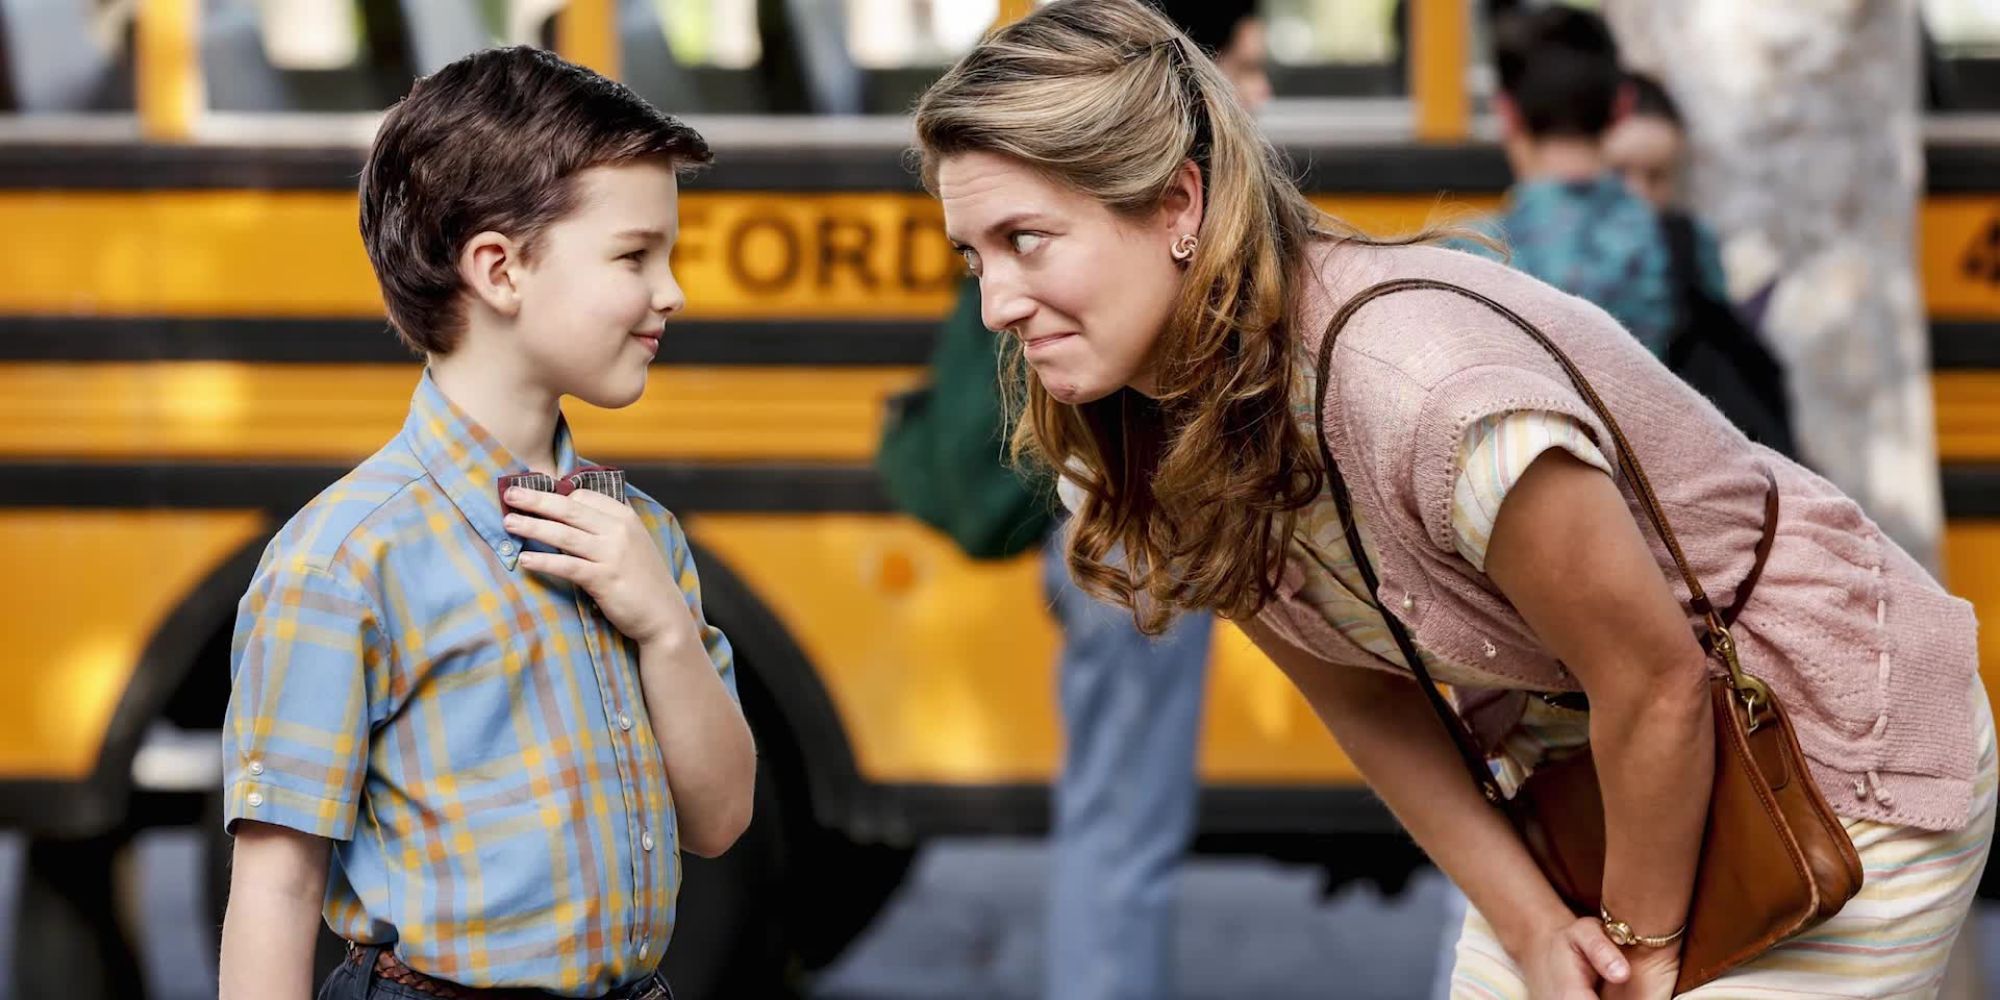 Mary talking to Sheldon outside of his high school in Young Sheldon